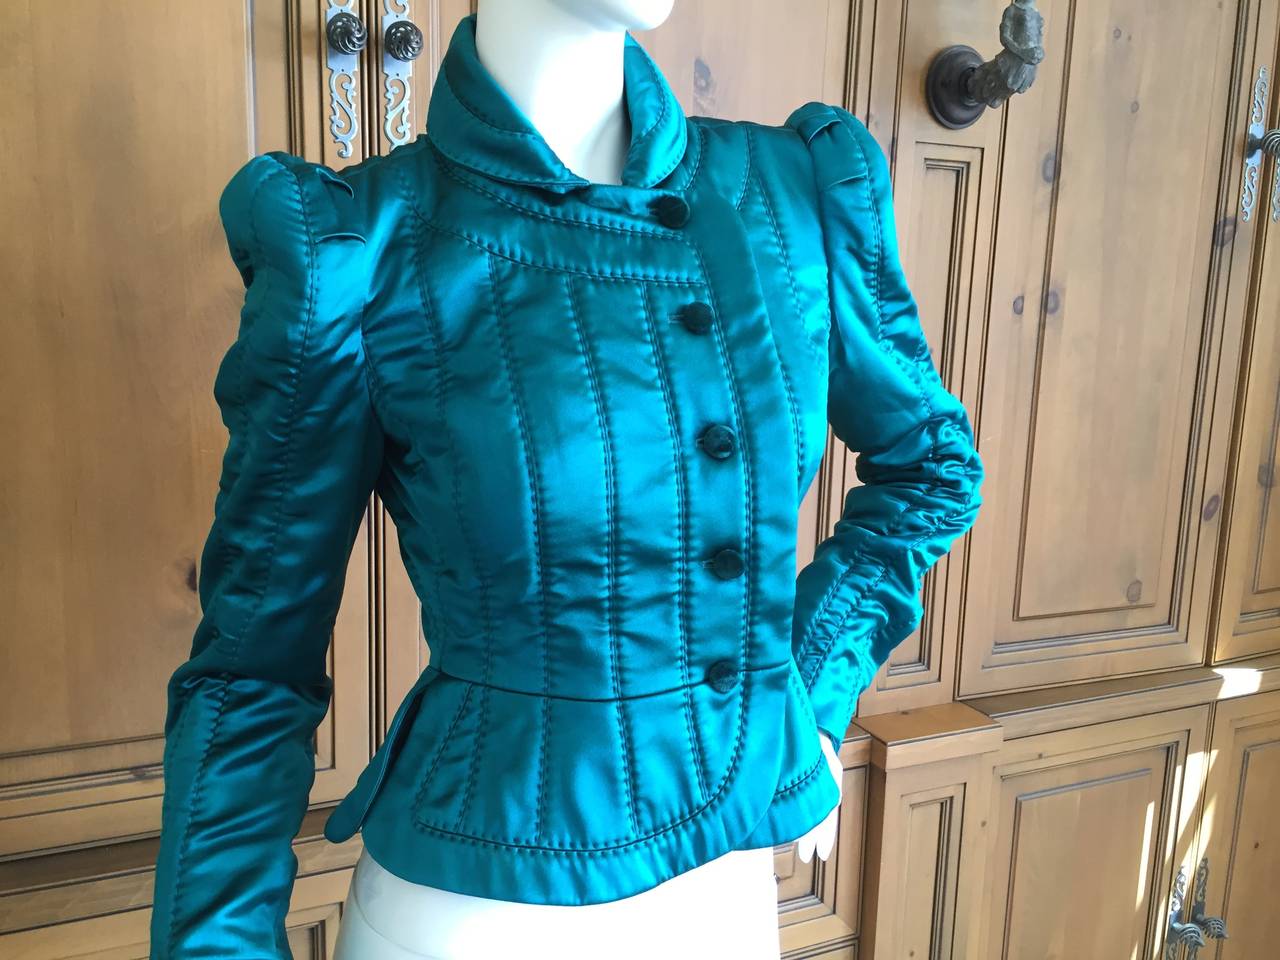 Yves Saint Laurent Tom Ford Fall 2002 Pagoda Shoulder Jacket In Excellent Condition For Sale In Cloverdale, CA